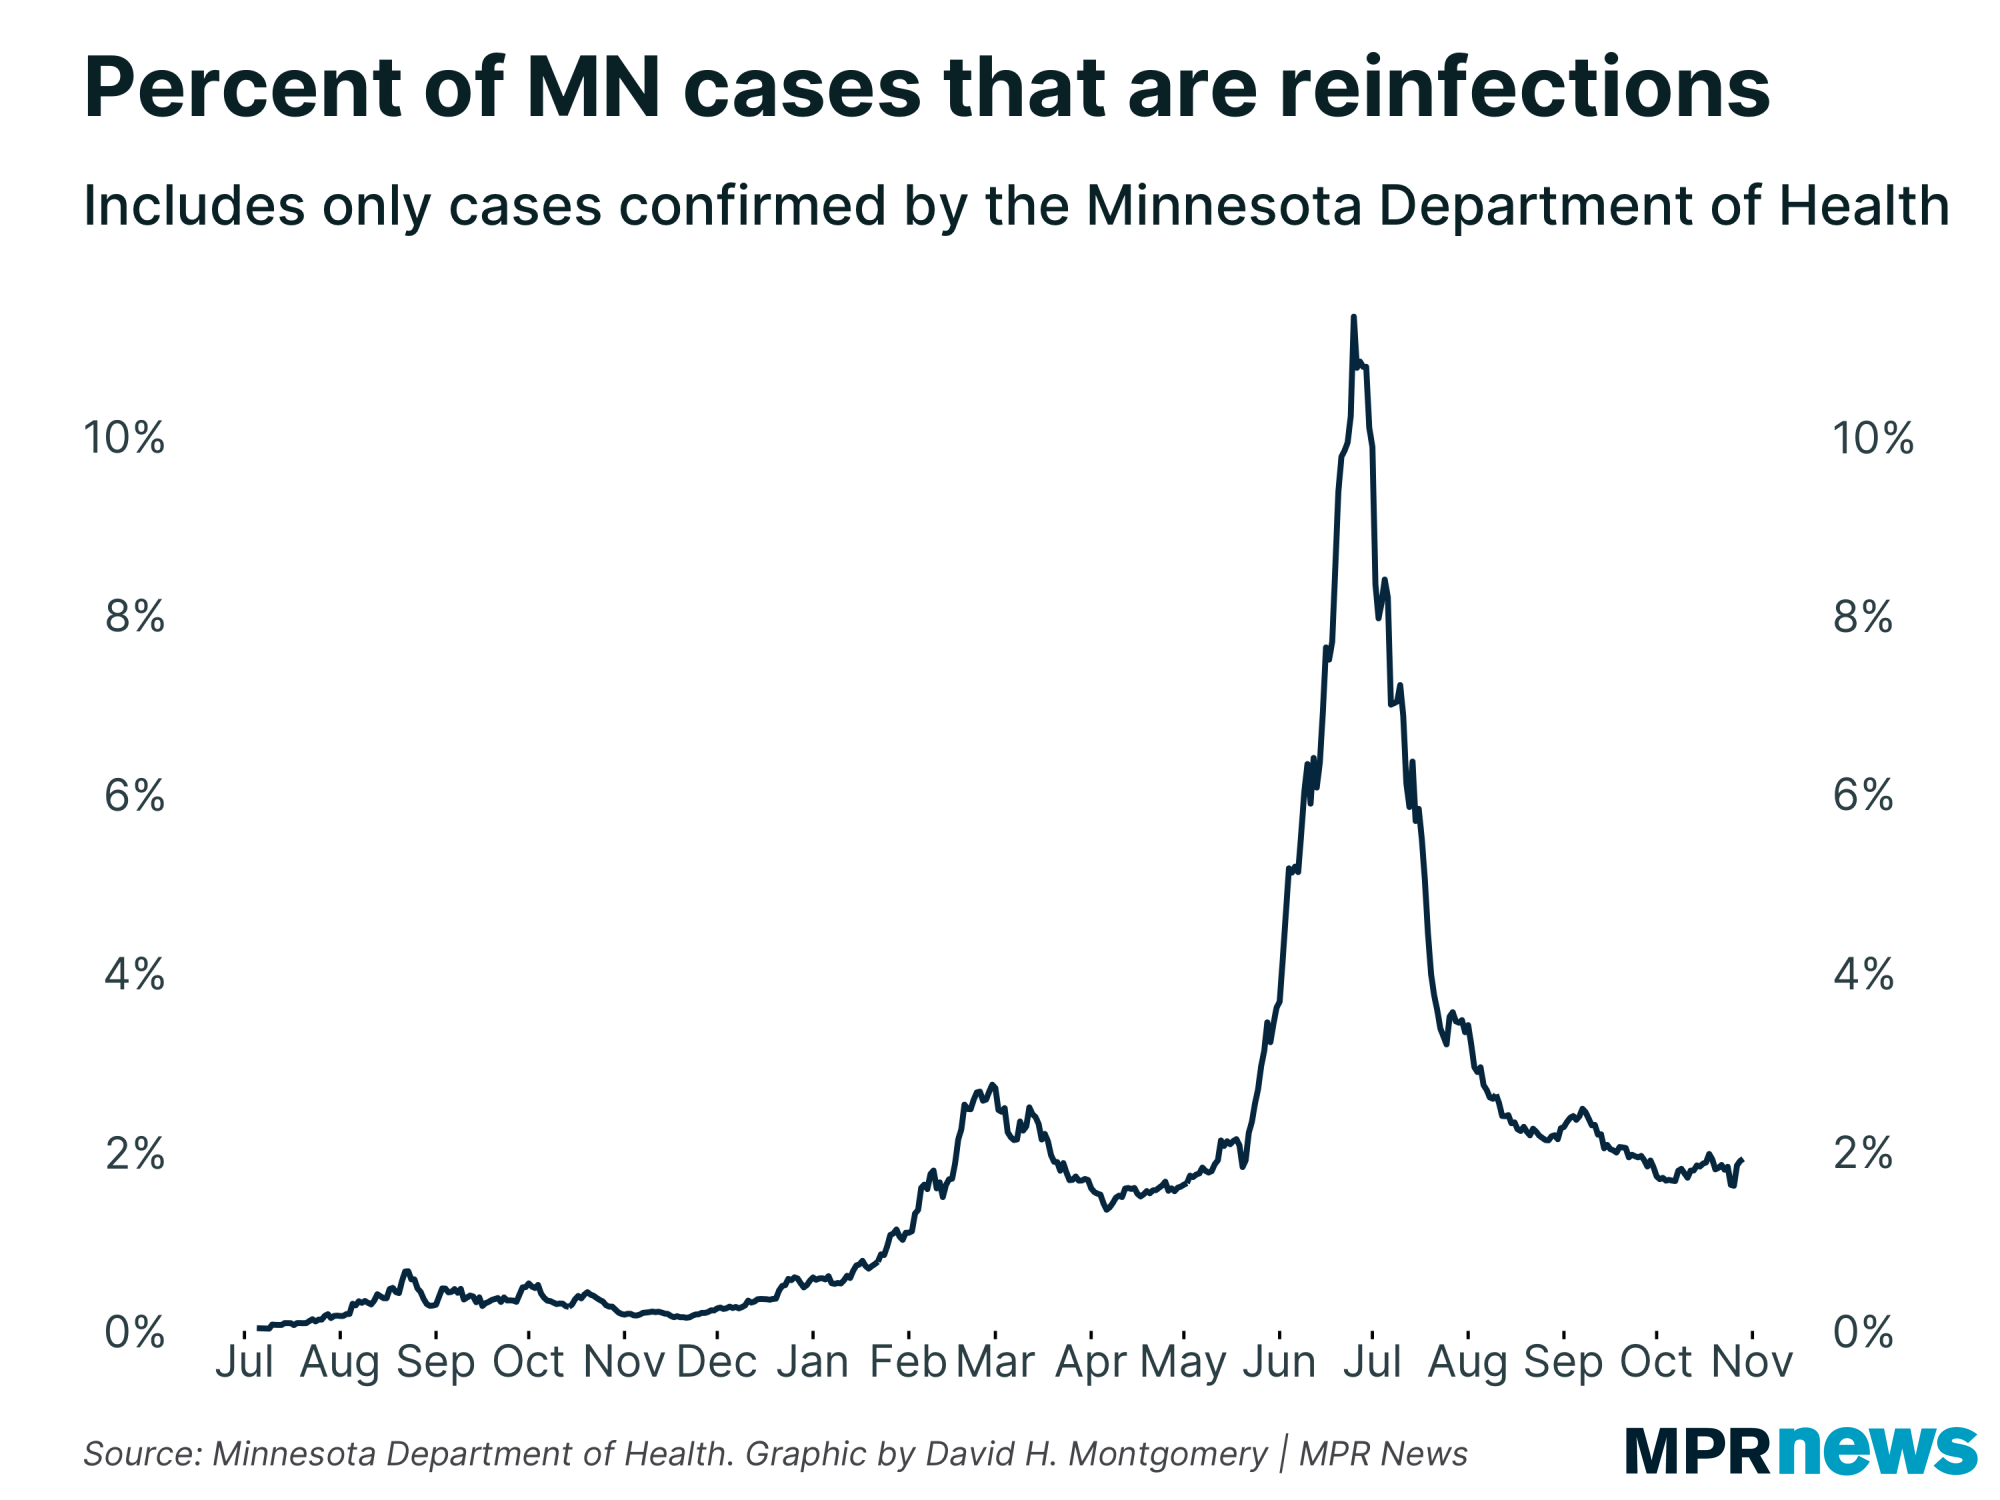 Graph of the percent of Minnesota COVID-19 cases that were reinfections